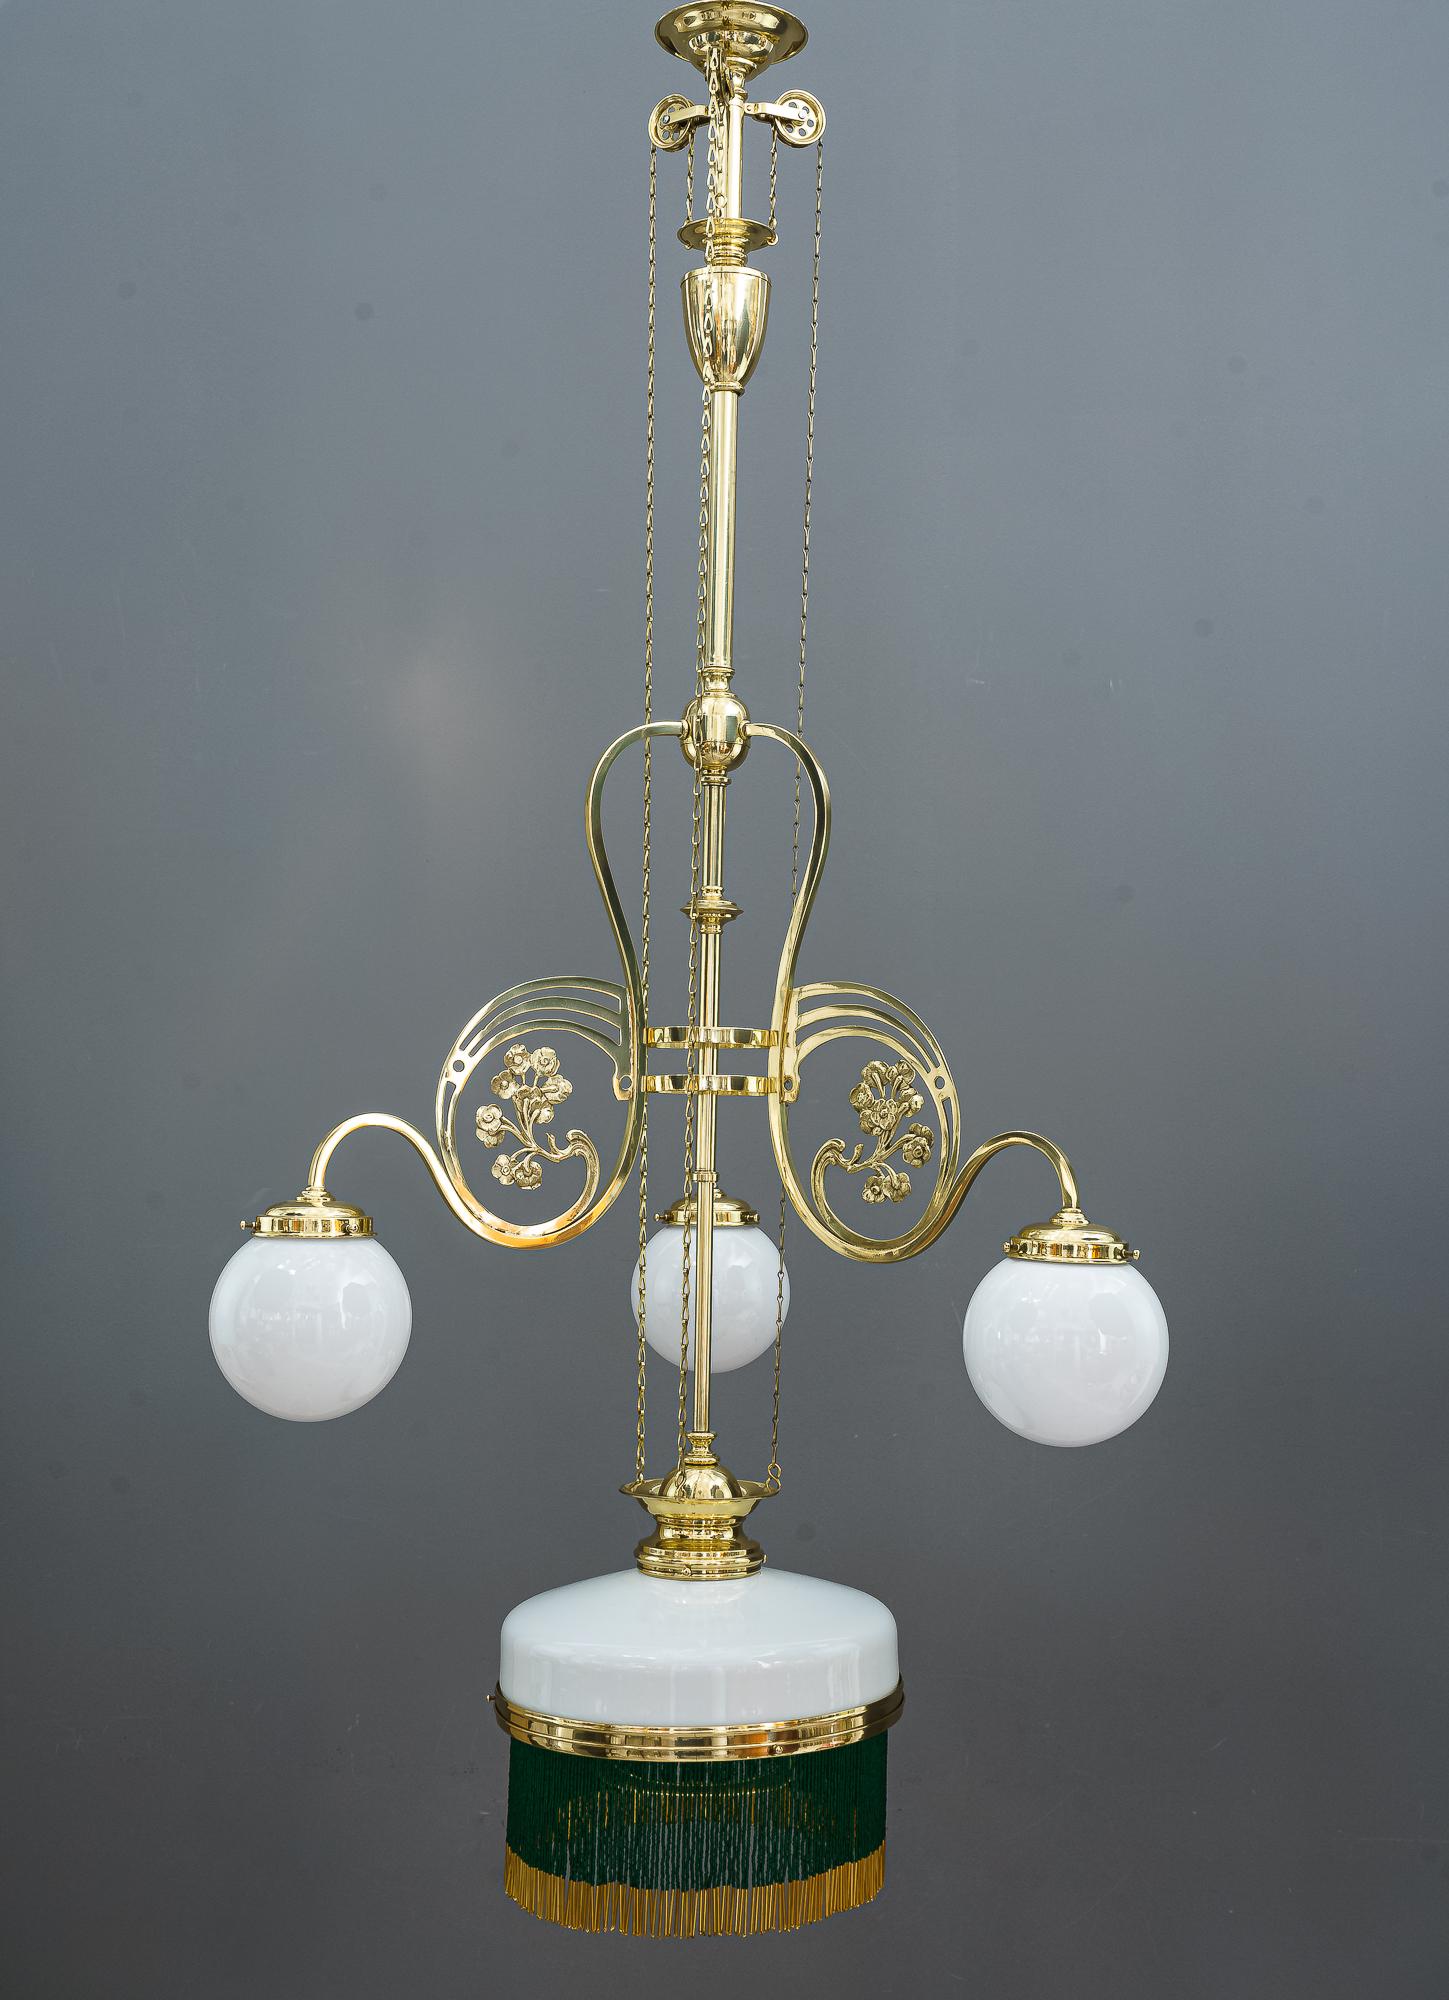 Adjustable Jugendstil chandelier with original opal glasses, Vienna, circa 1908
The pearls are new
Polished and stove enameled
Adjustable from 122cm up to 141cm.